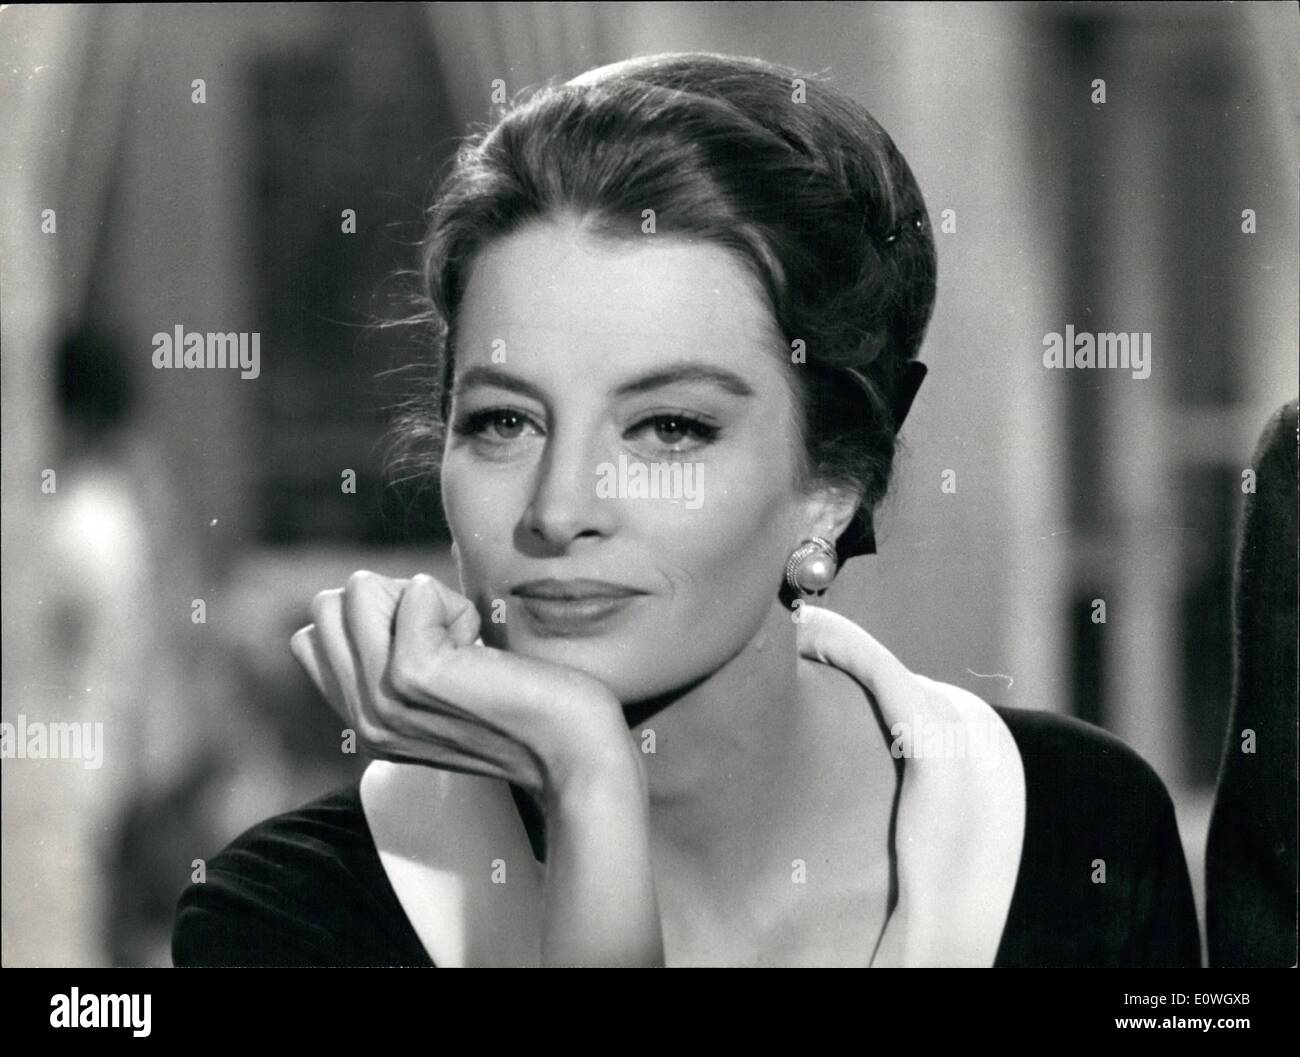 Dec. 12, 1962 - In the Studios of dinecitta CAPUCINE the beautiful former French mannequin, together with a cast of famous actors and actresses, is starring in the film ''The Pink Panther'' and and american production directed by Blake Edwards. PETER SELLERs the english famous comic actor, DAVID NIVEN, american Robert Wagner and our young actress Claudia Cardinale are among the selected cast of the film. CAPUCINE whose beauty is famous all over the world, began her cinematographic career only two years ago, when she was noticed by a fashion cameraman who decided to make her a star Stock Photo